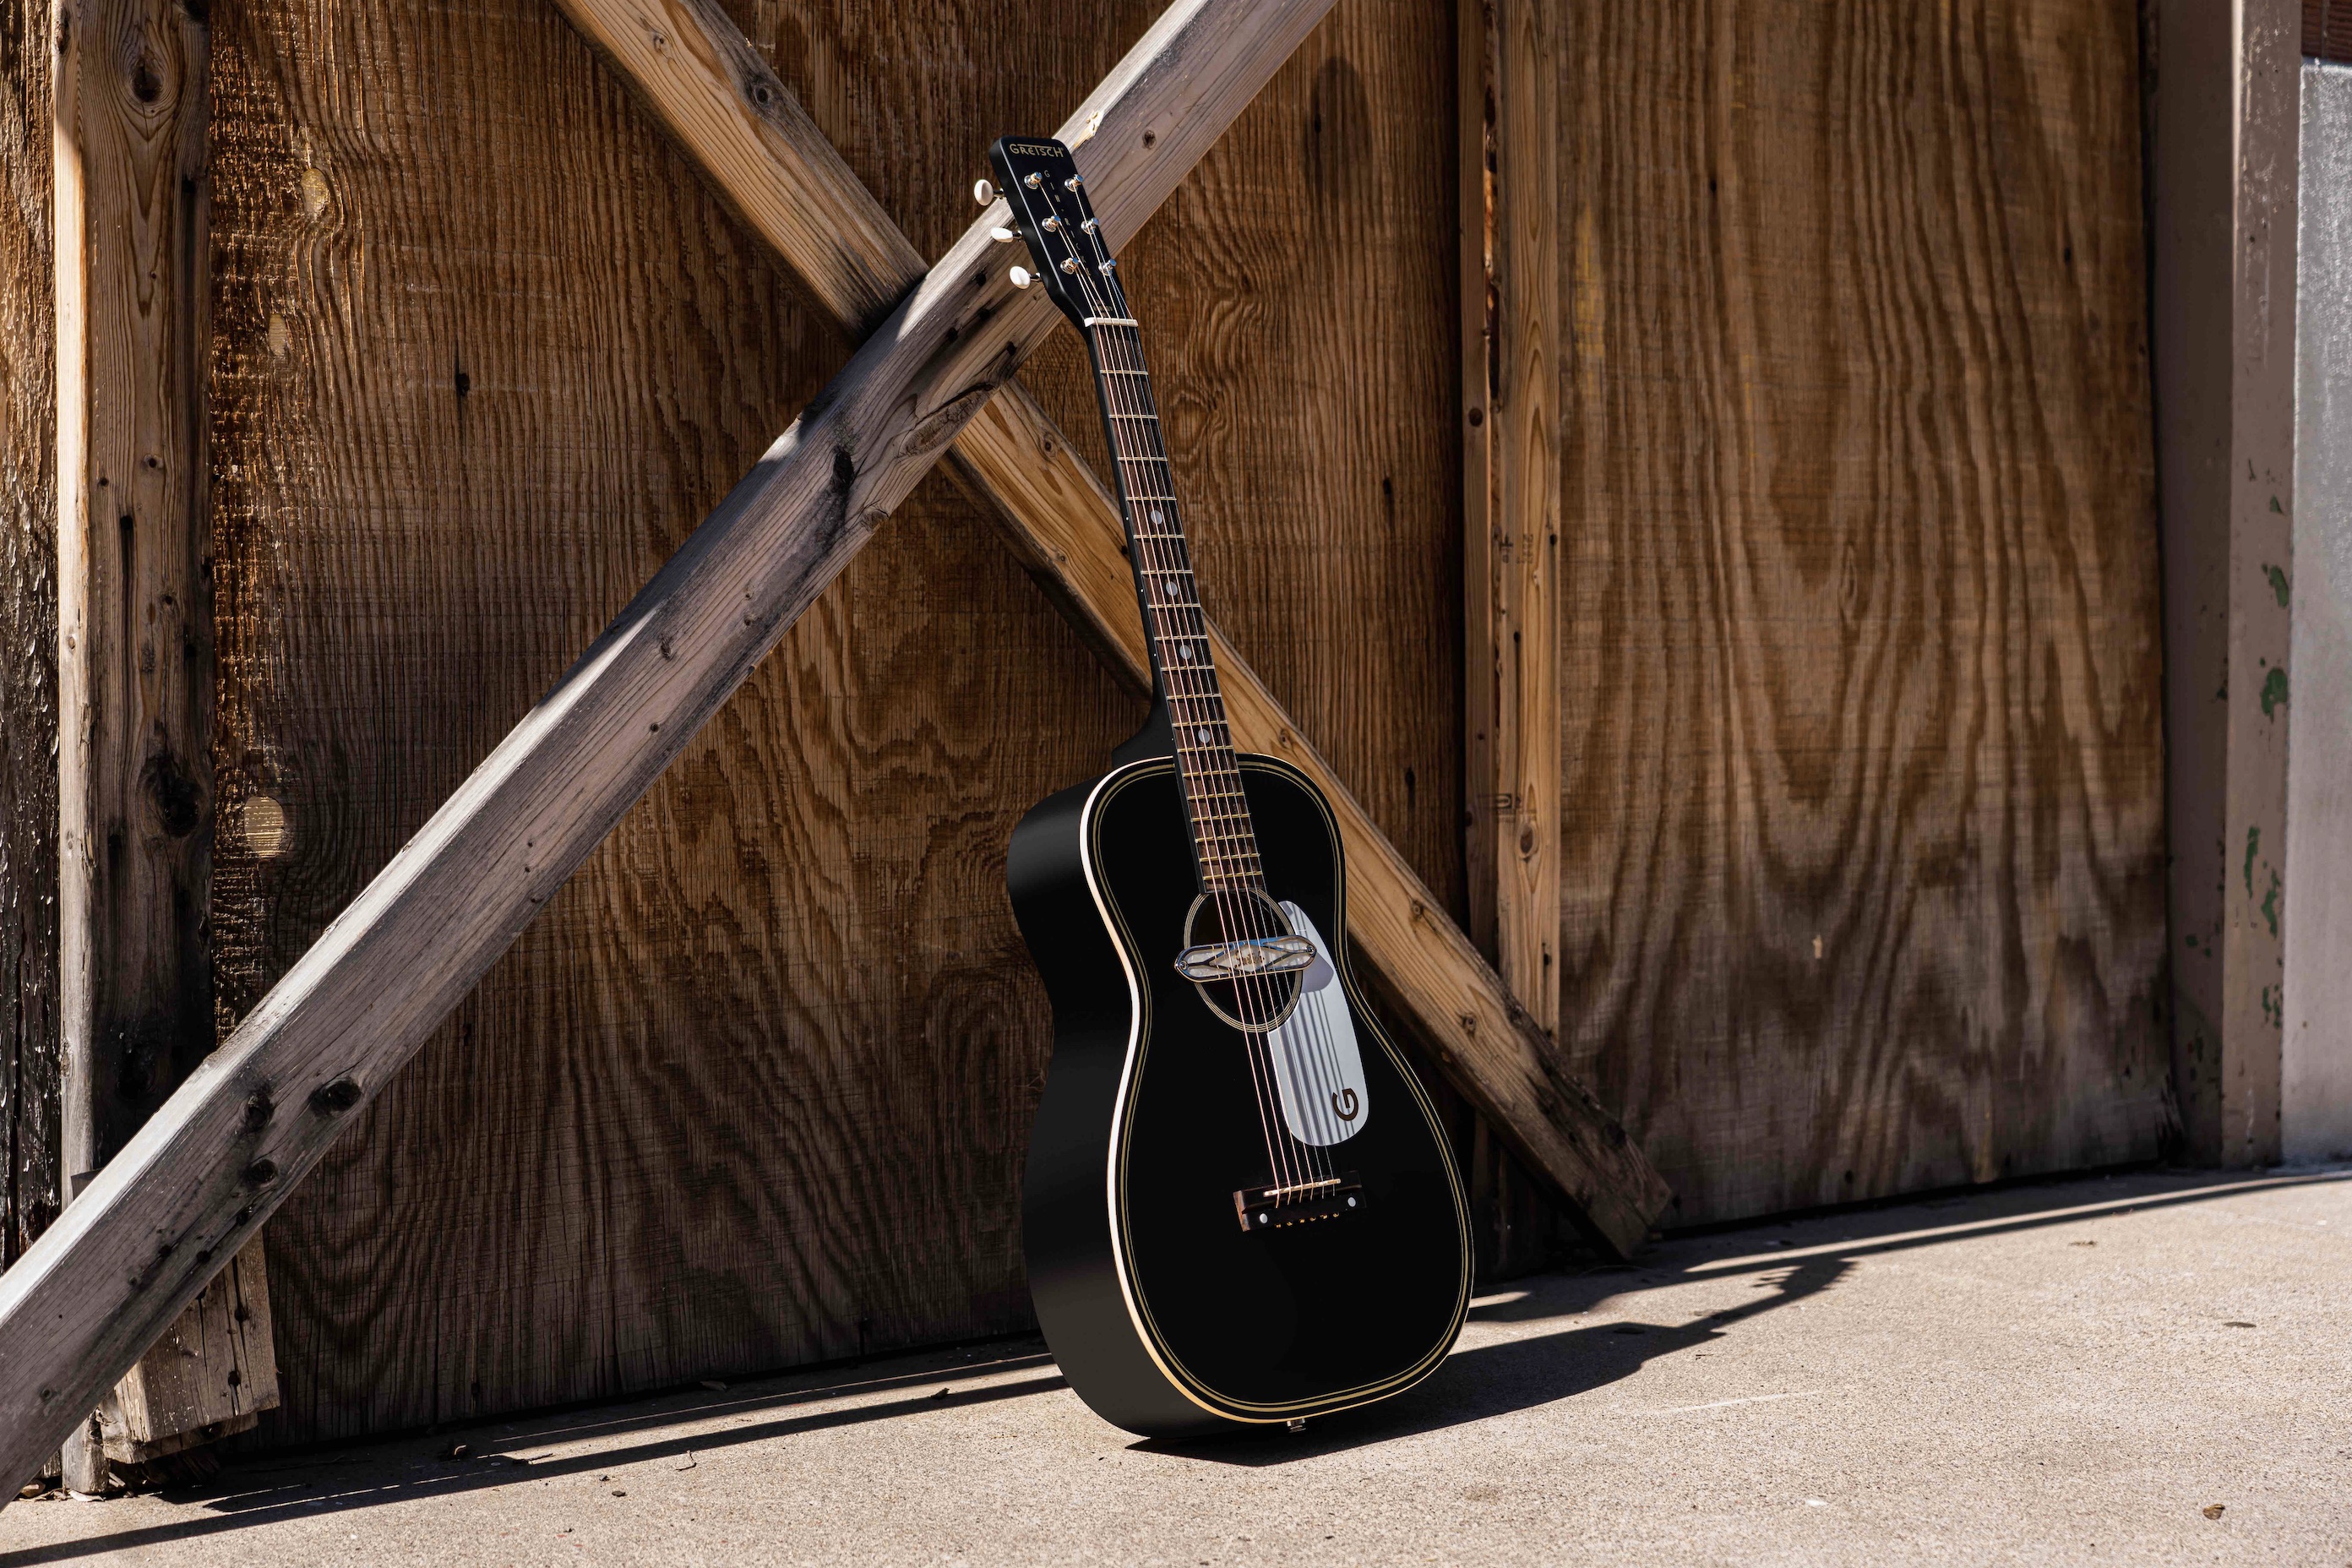 Gretsch Announces Two New Parlor Guitar Models